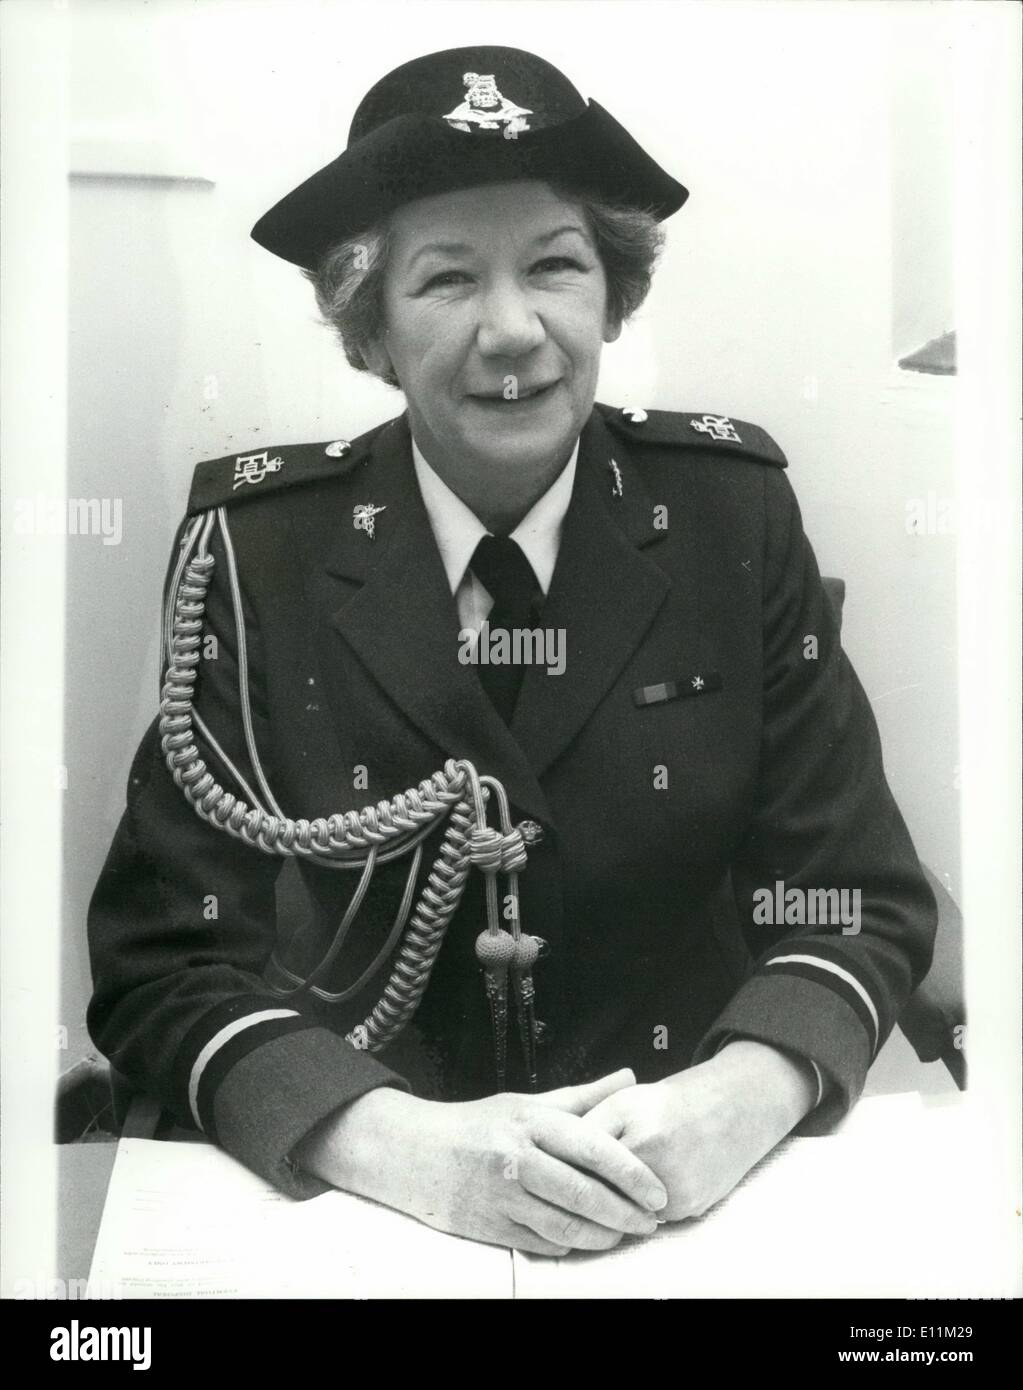 Oct. 10, 1978 - Group Officer Joan Metcalfe New Matron in Chief Royal Air Force Nursing Service. Group Officer Joan Metcalfe, today hook up her appointment as Director, Royal Air Force Nursing Services and Matron in Chief, Princess Marry's Royal Air Force Nursing Service, in the acting rank of Air Commandant. She is also appointed Monoarry Nursing Sister to Her Majesty the Queen. Photo Shows: Air Commandant in her office this morning at First Avenue House High Holborn. Stock Photo